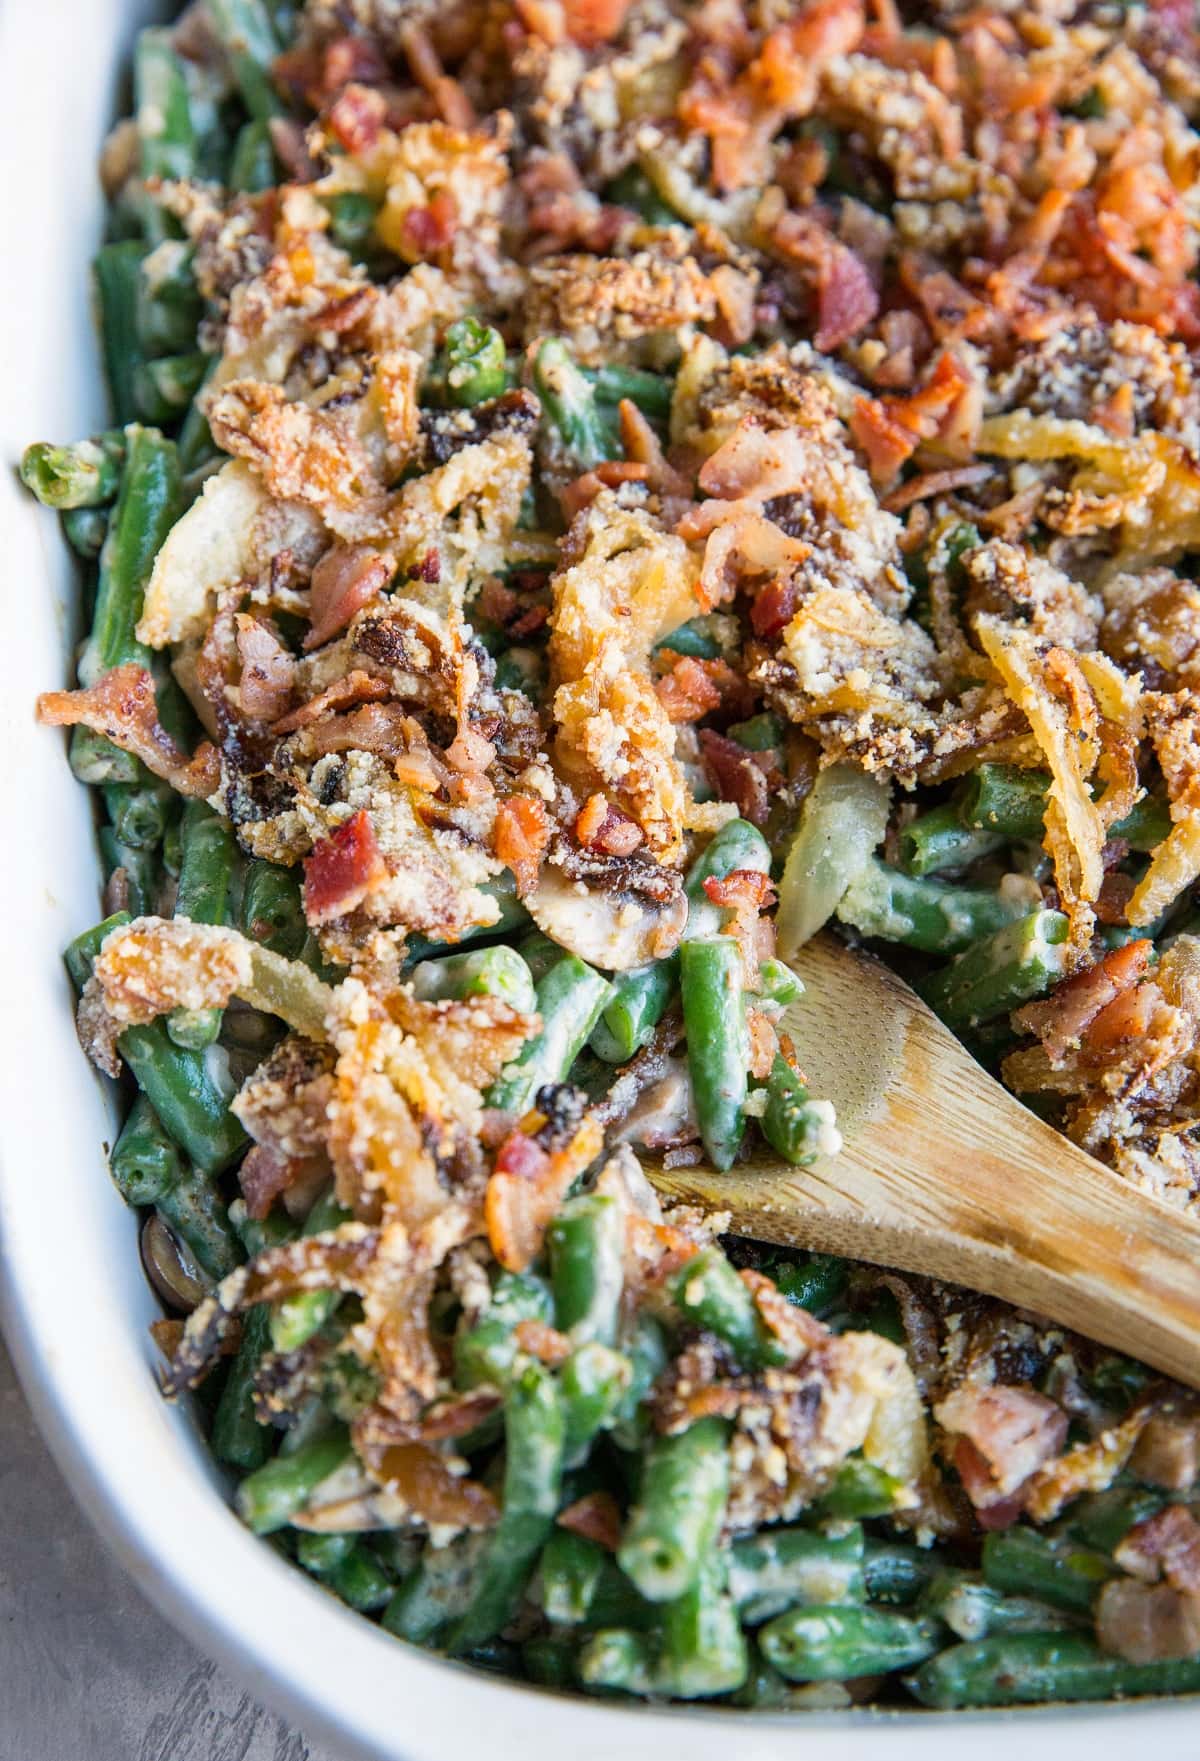 Keto Green Bean Casserole made dairy-free and wheat-free for a healthier version. Amazing holiday side dish that is low-carb and delicious!